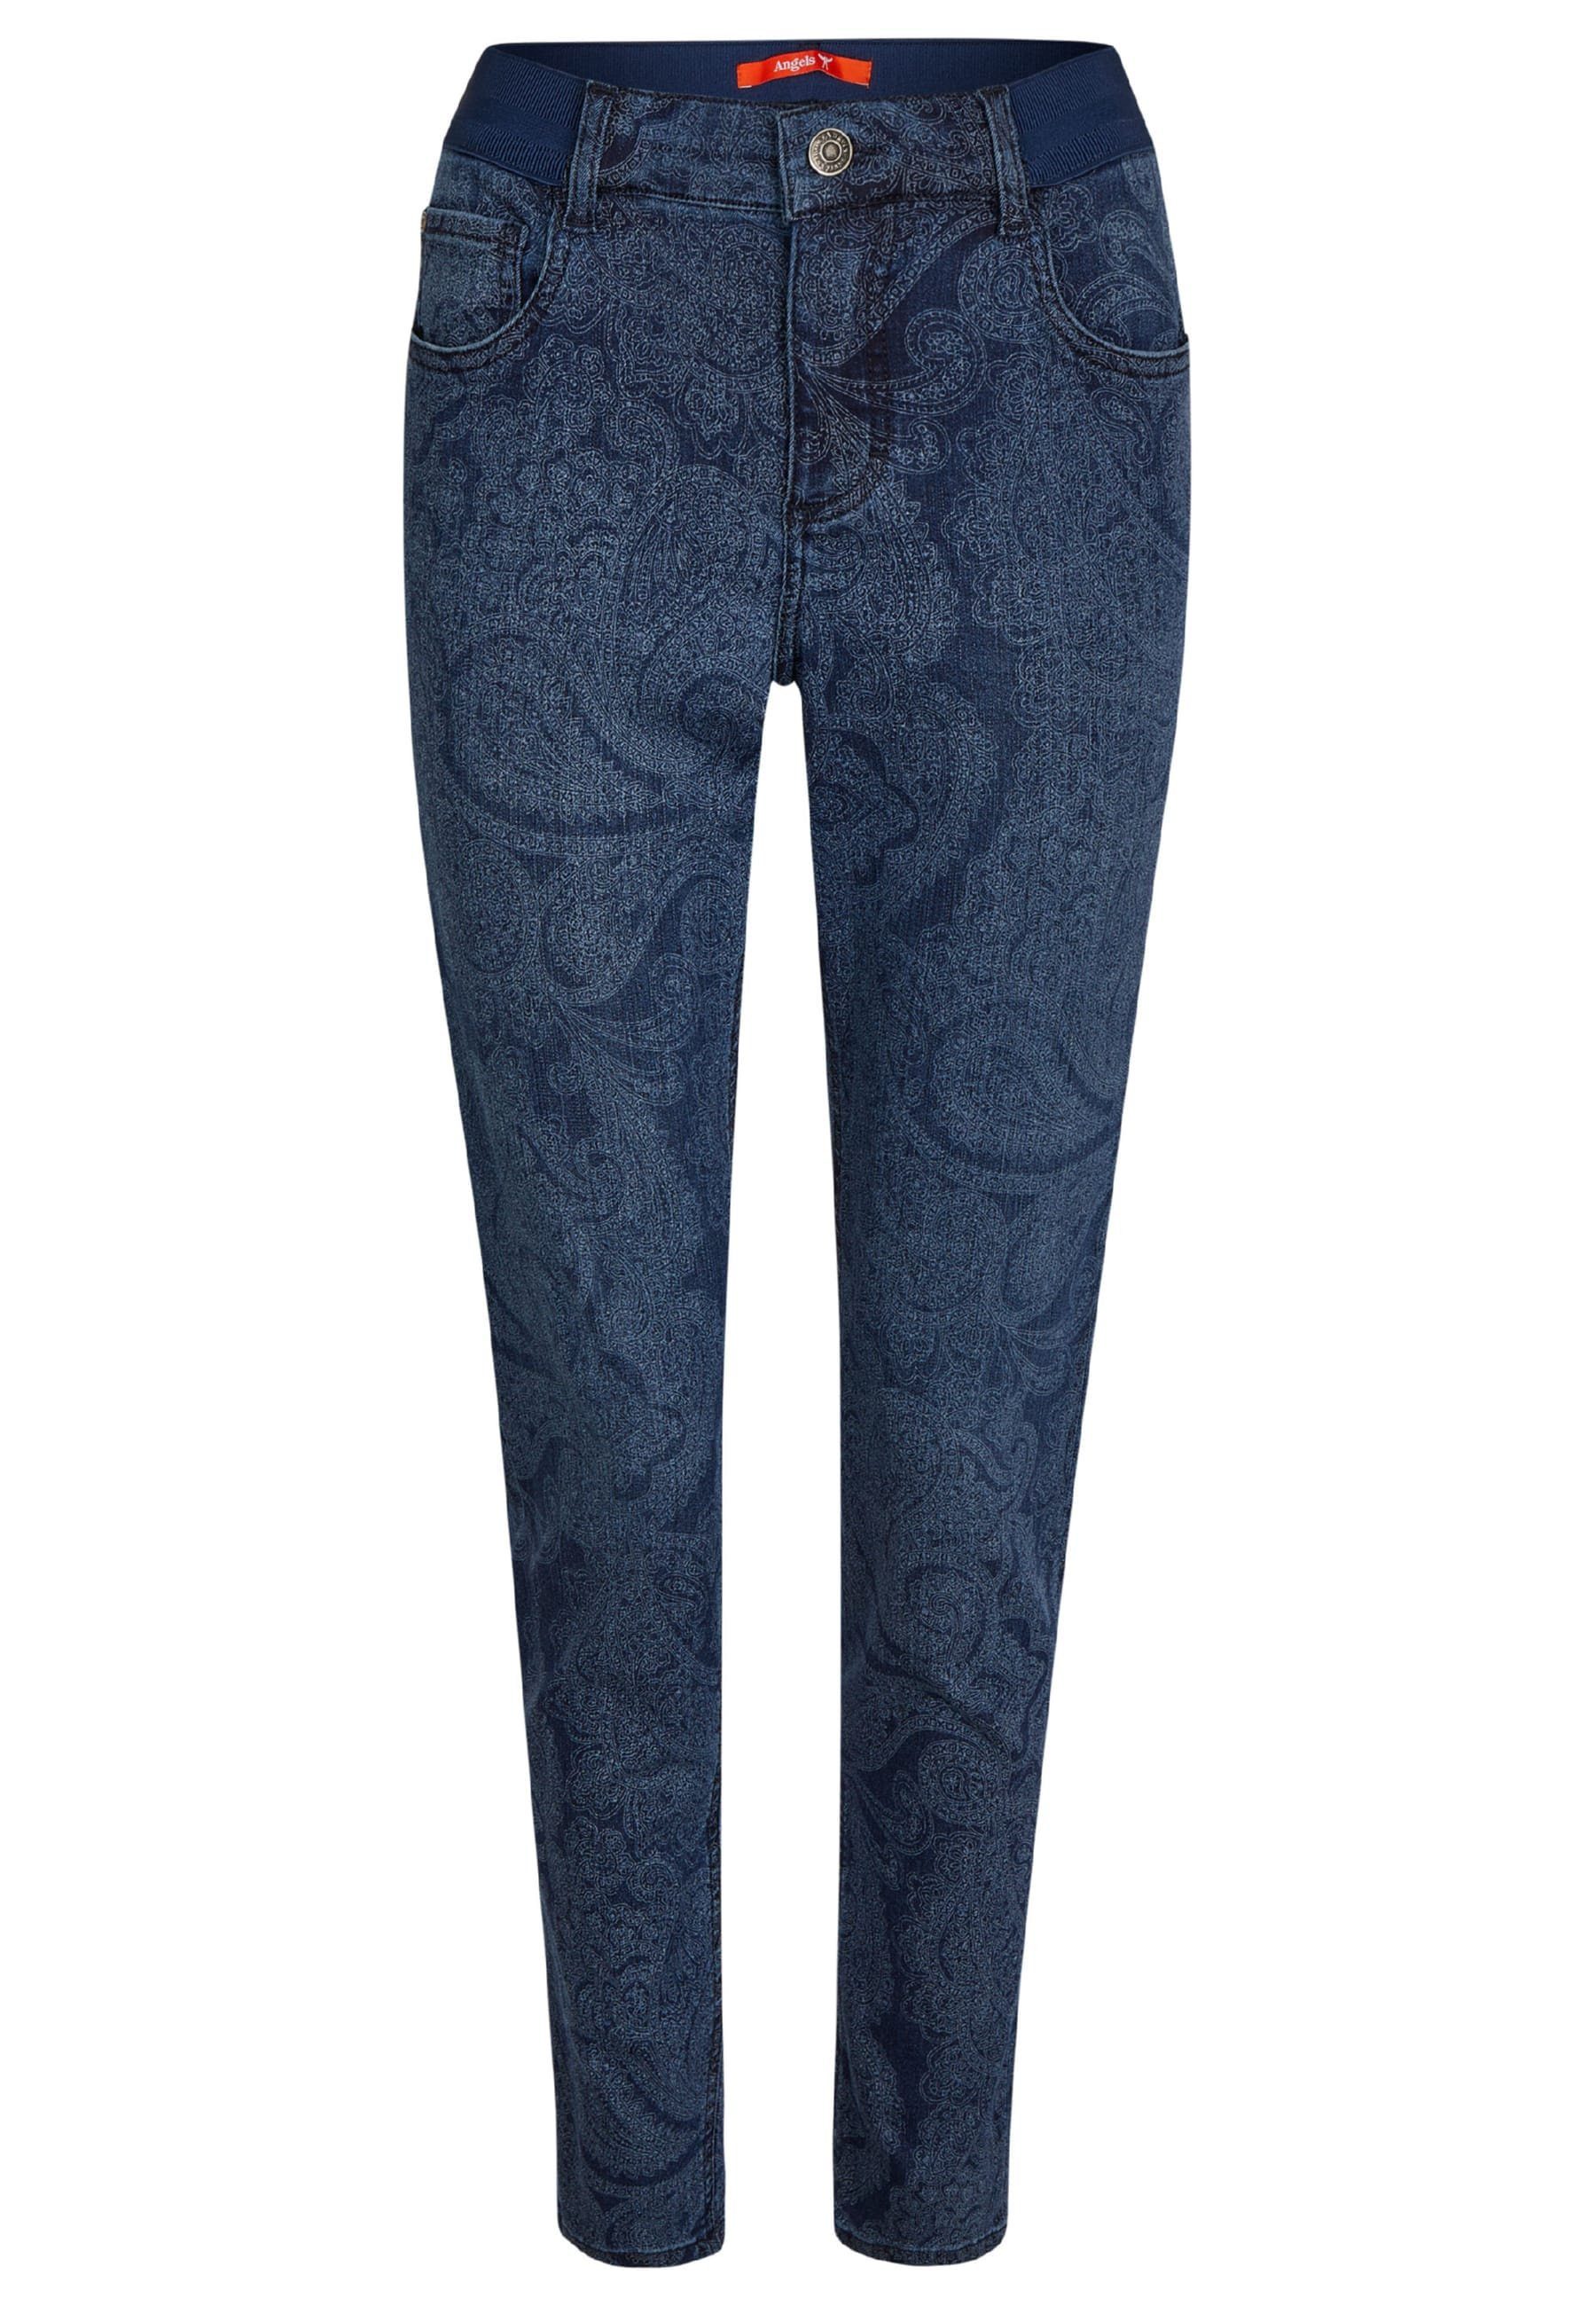 ANGELS Label-Applikationen One Paisley-Muster mit mit Slim-fit-Jeans Size Jeans blue